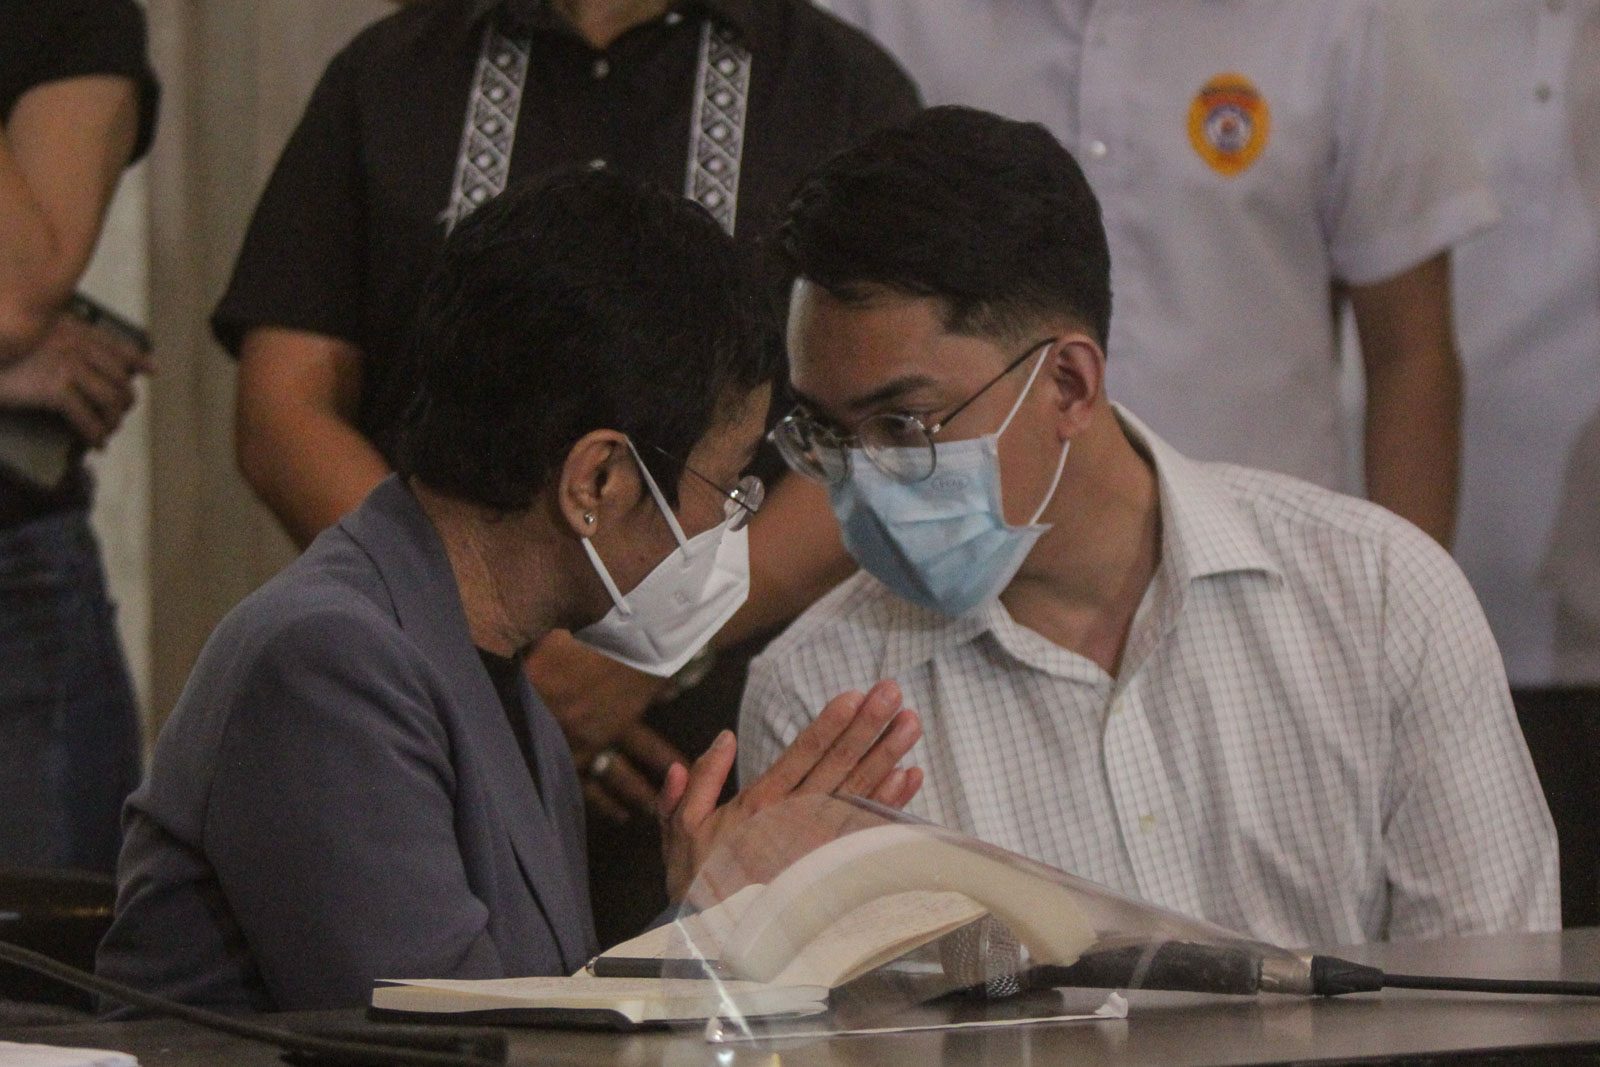 CA affirms Maria Ressa’s cyber libel conviction, adds 8 months to possible jail sentence